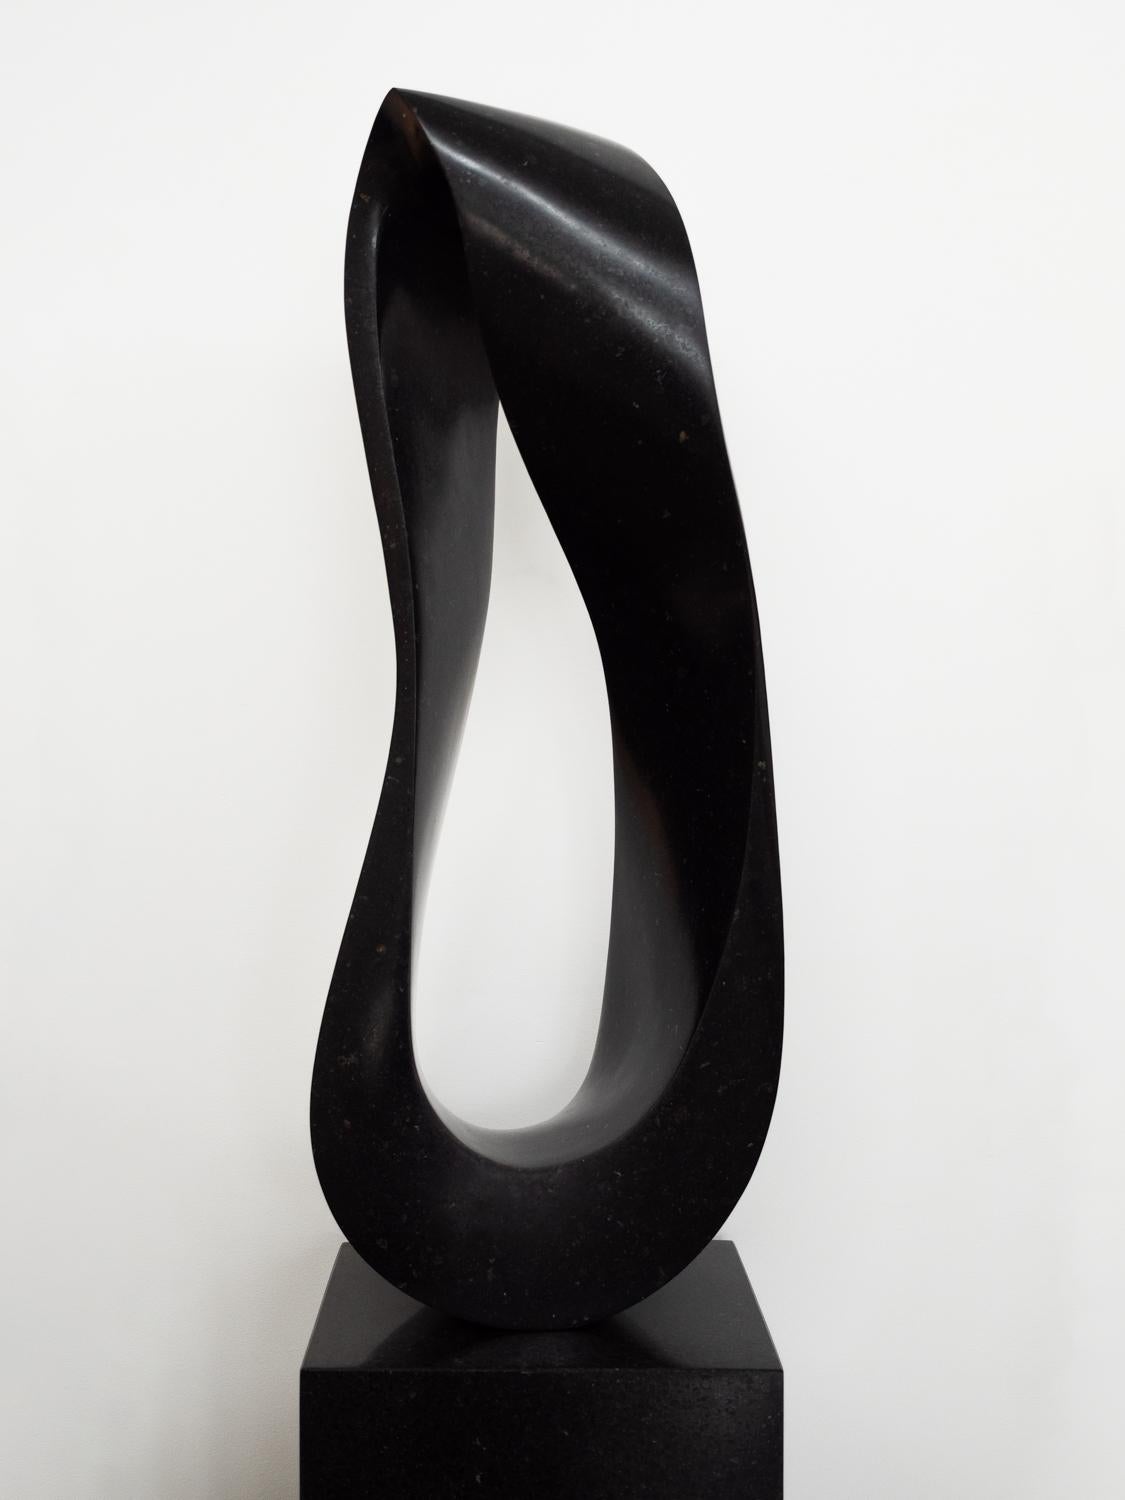 Mobius H3 6/20 - Sculpture by Jeremy Guy